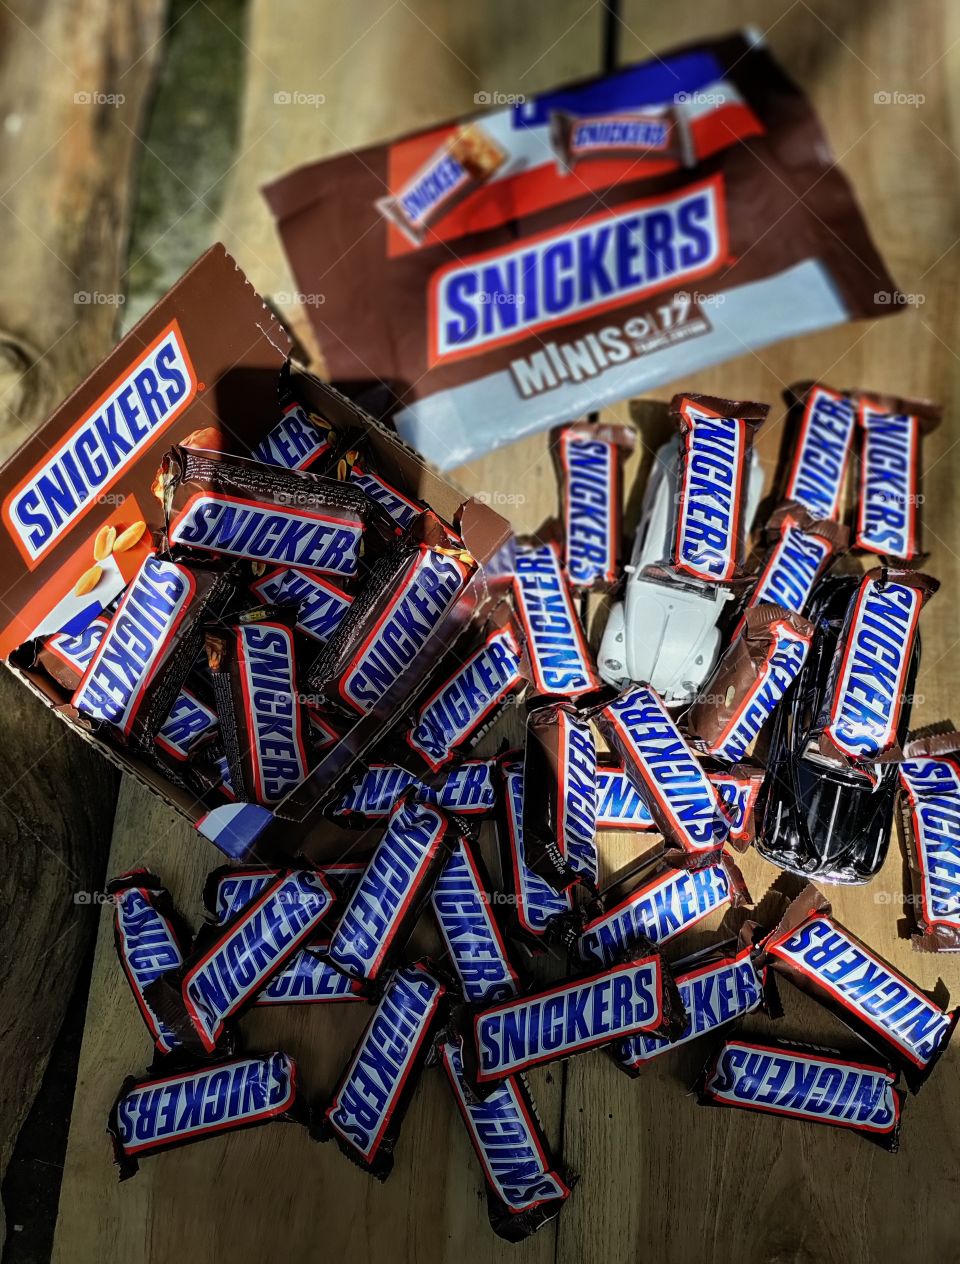 SNICKERS chocolates, enjoying your lifes